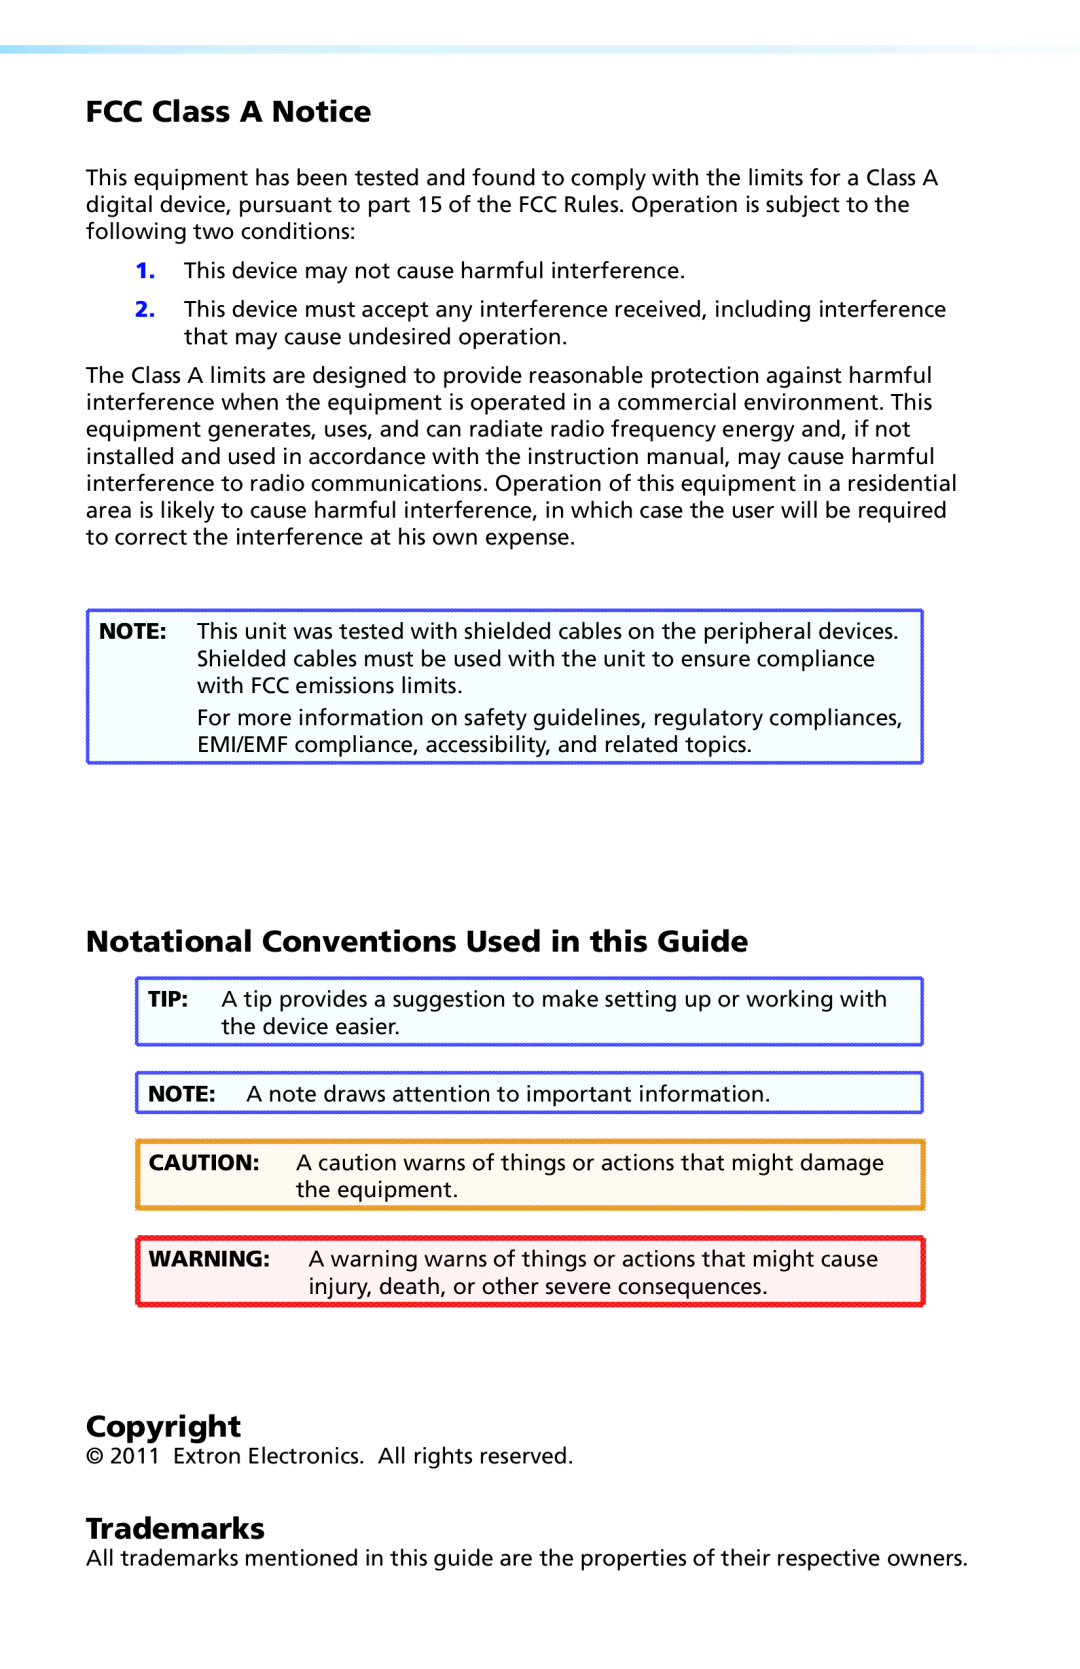 Extron electronic TLP VIM manual FCC Class A Notice, Notational Conventions Used in this Guide, Copyright, Trademarks 